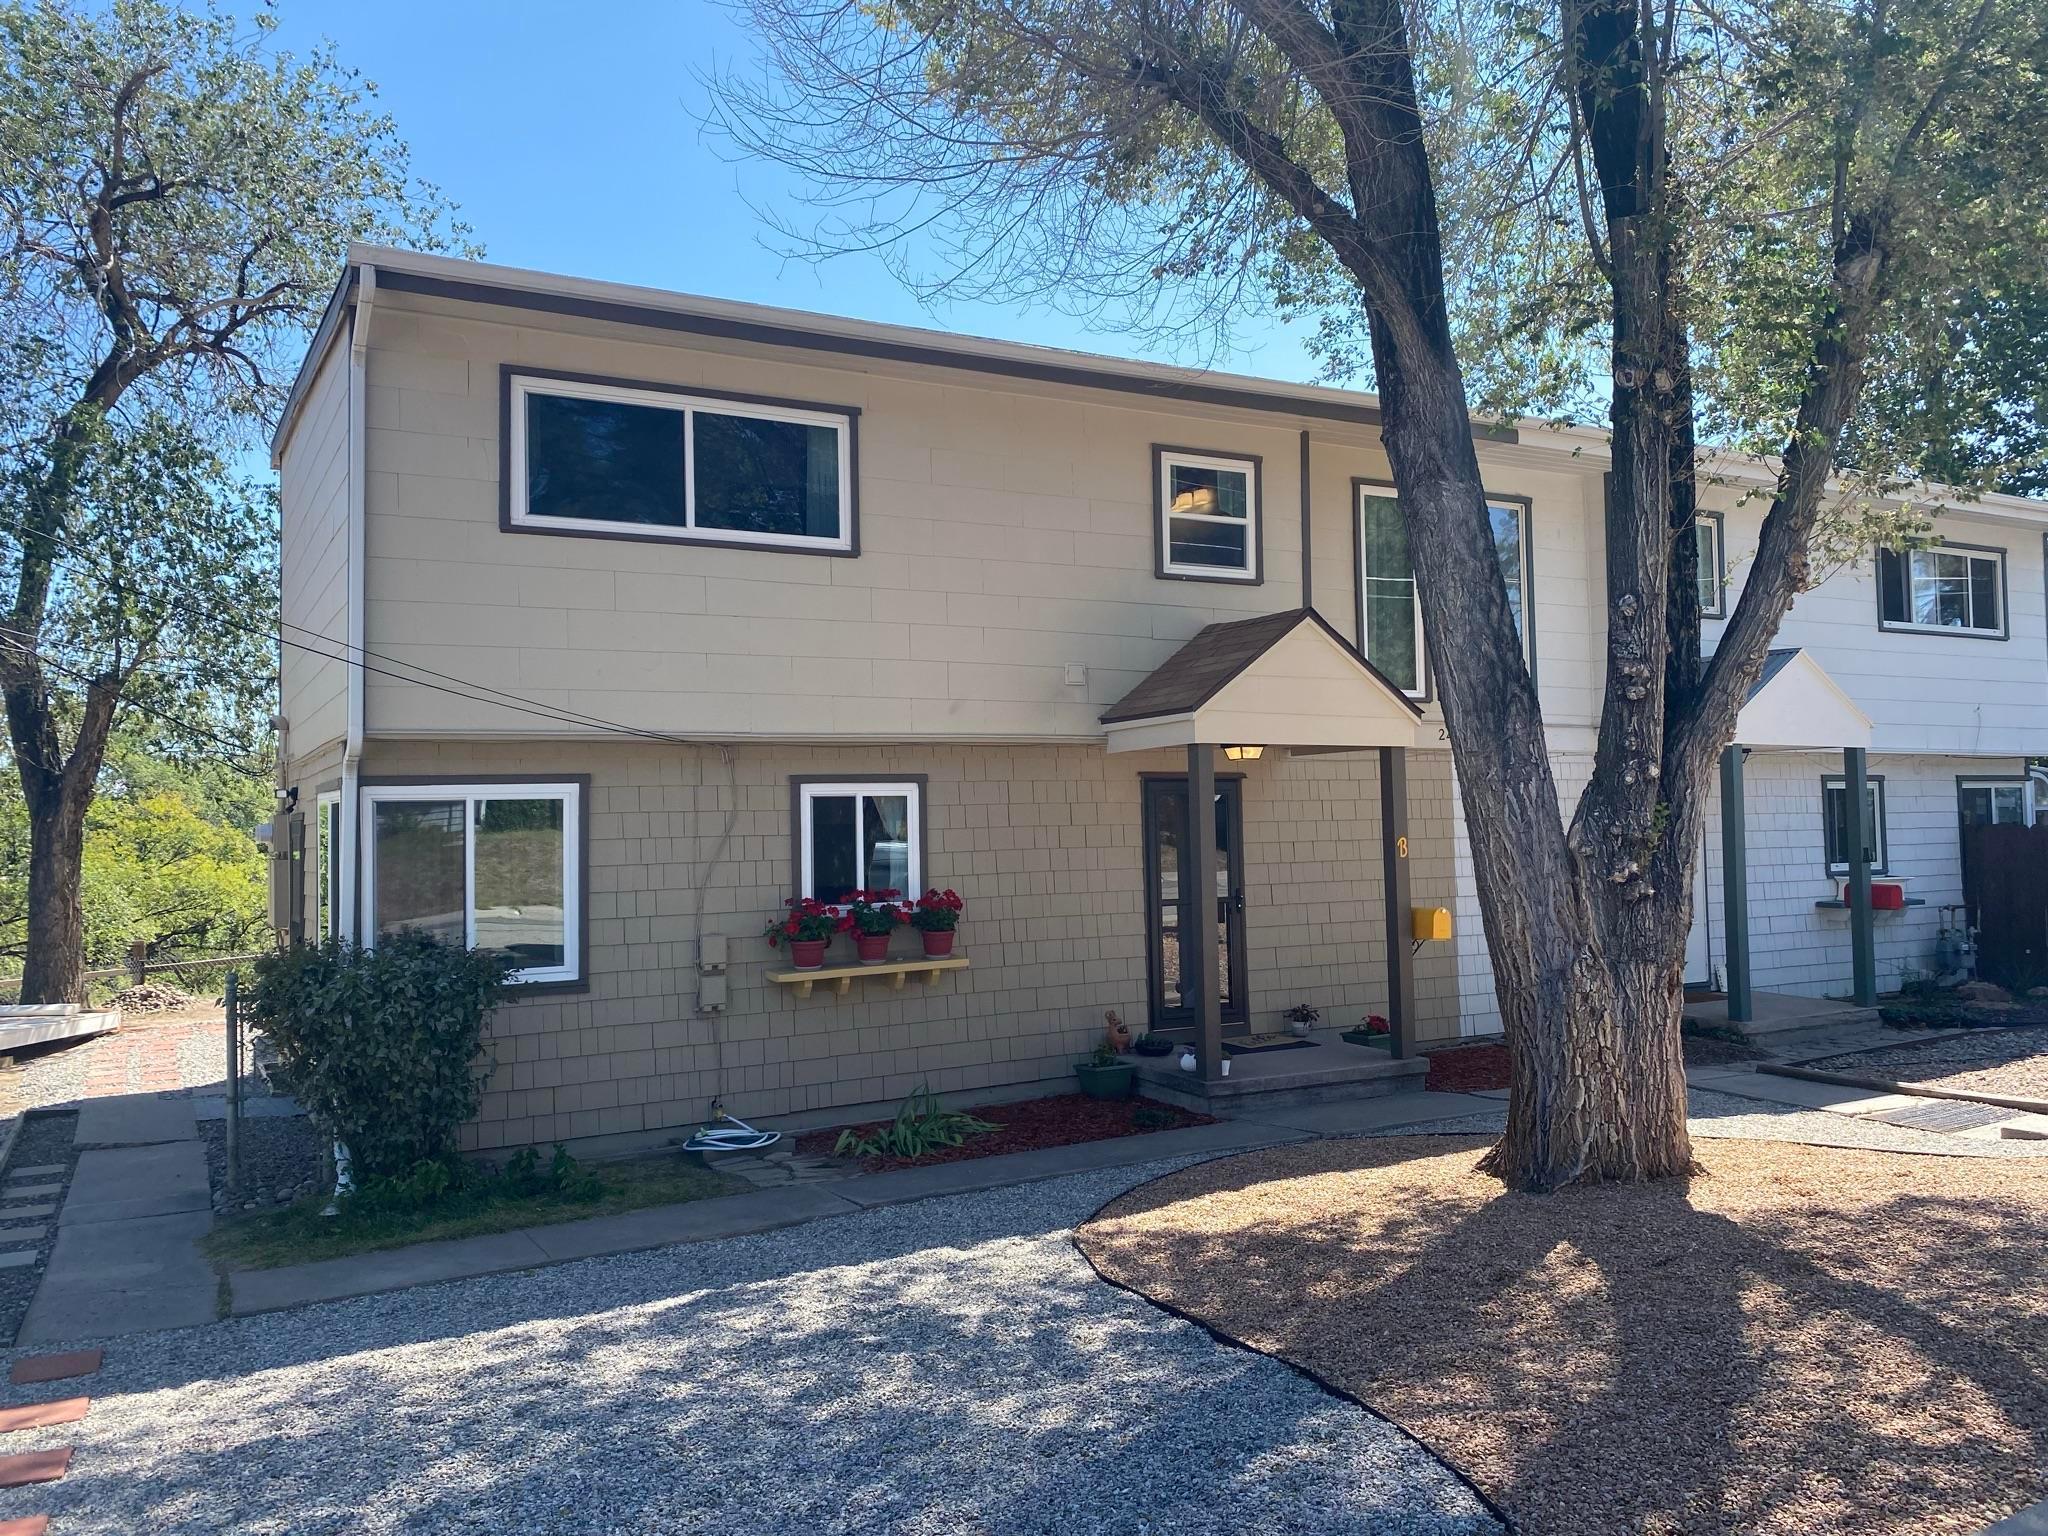 2426 35TH B, Los Alamos, New Mexico 87544, 3 Bedrooms Bedrooms, ,1 BathroomBathrooms,Residential,For Sale,2426 35TH B,202103855